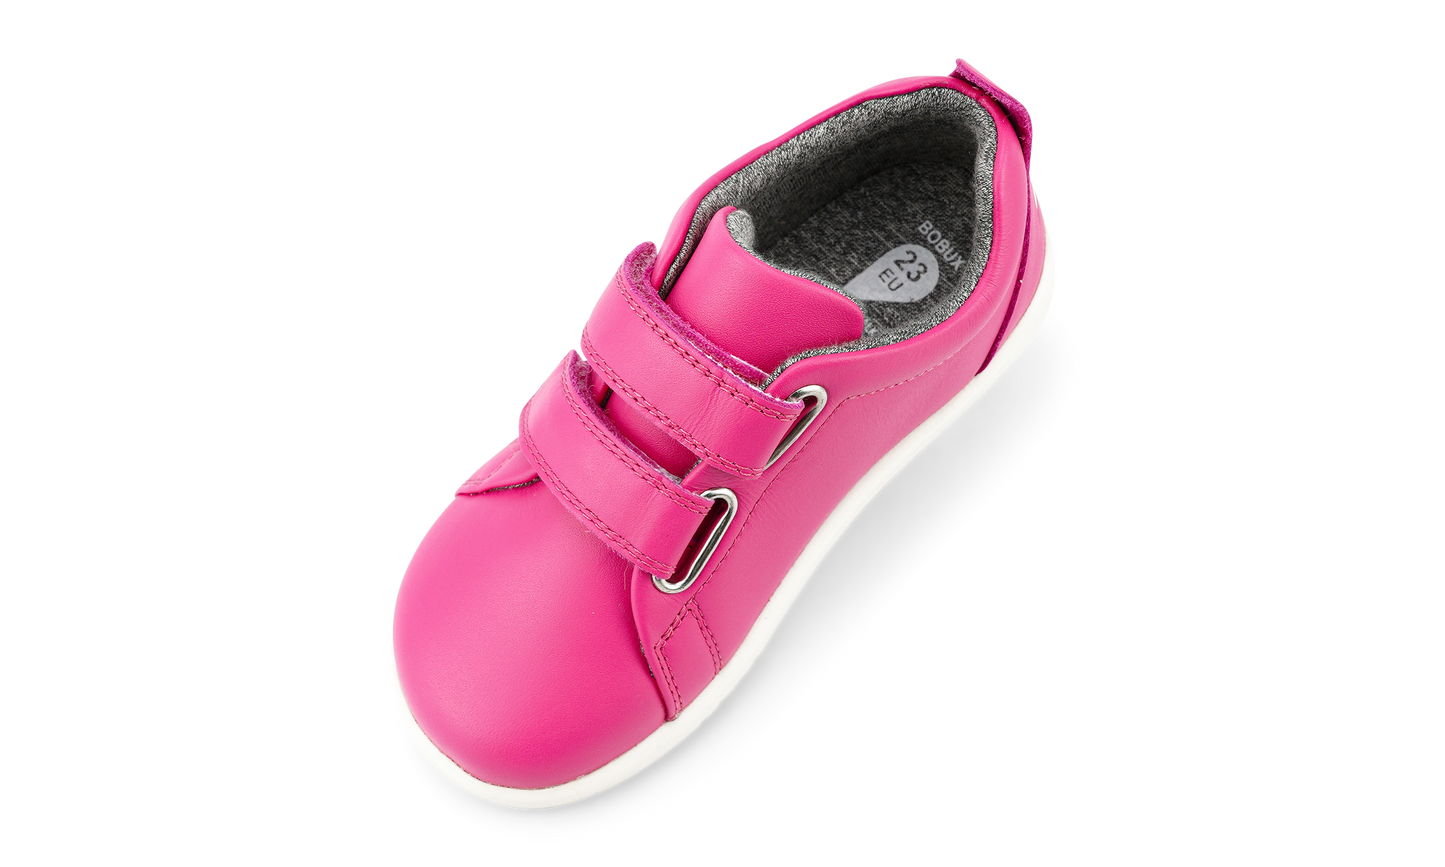 IW Grass Court Shoe in Fuchsia Pink Leather